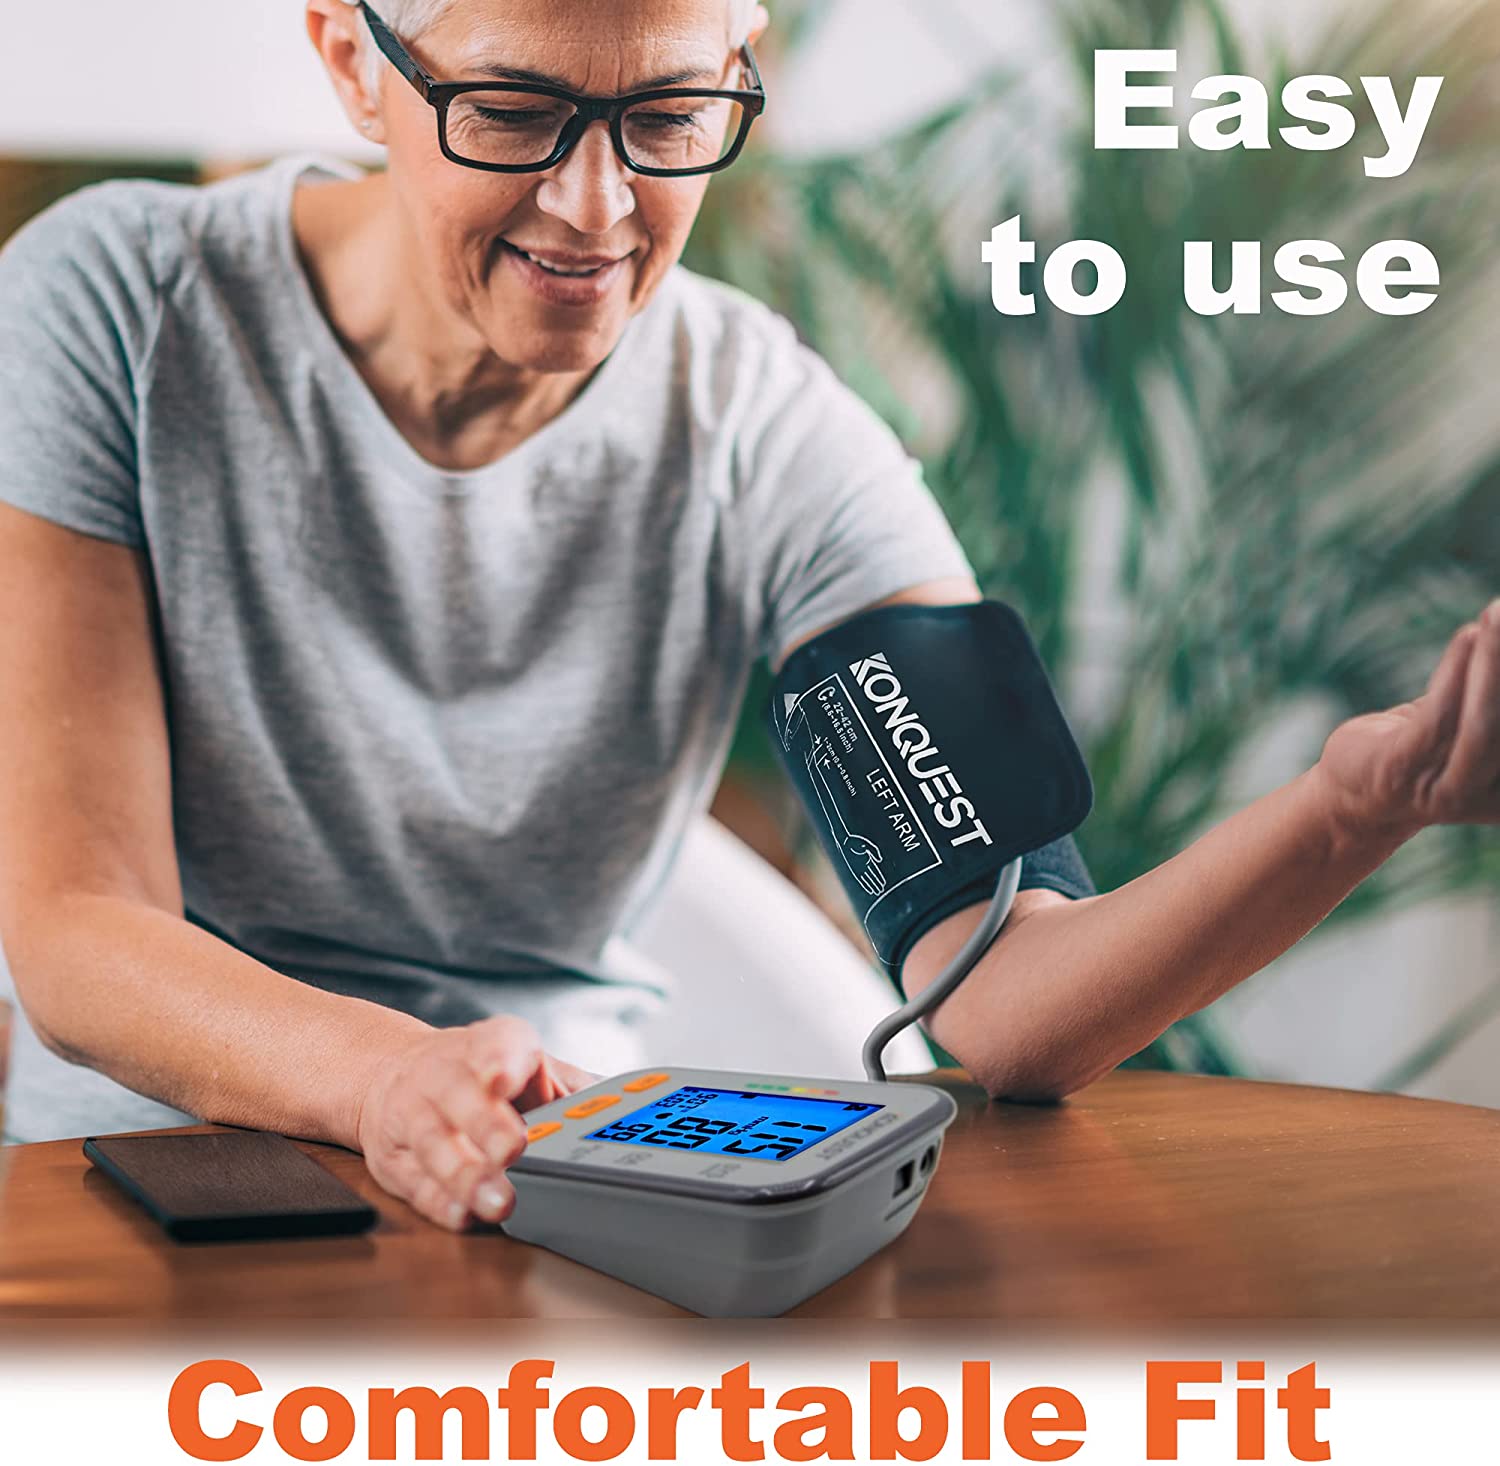 Konquest - 📣NEW PRODUCT!!!!!! Konquest KBP-2910W Automatic Wrist Blood  Pressure Monitor - Accurate, FDA Approved - Adjustable Cuff, Large Screen  Display, Portable Case - Irregular Heartbeat & Hypertension Detector . . . #